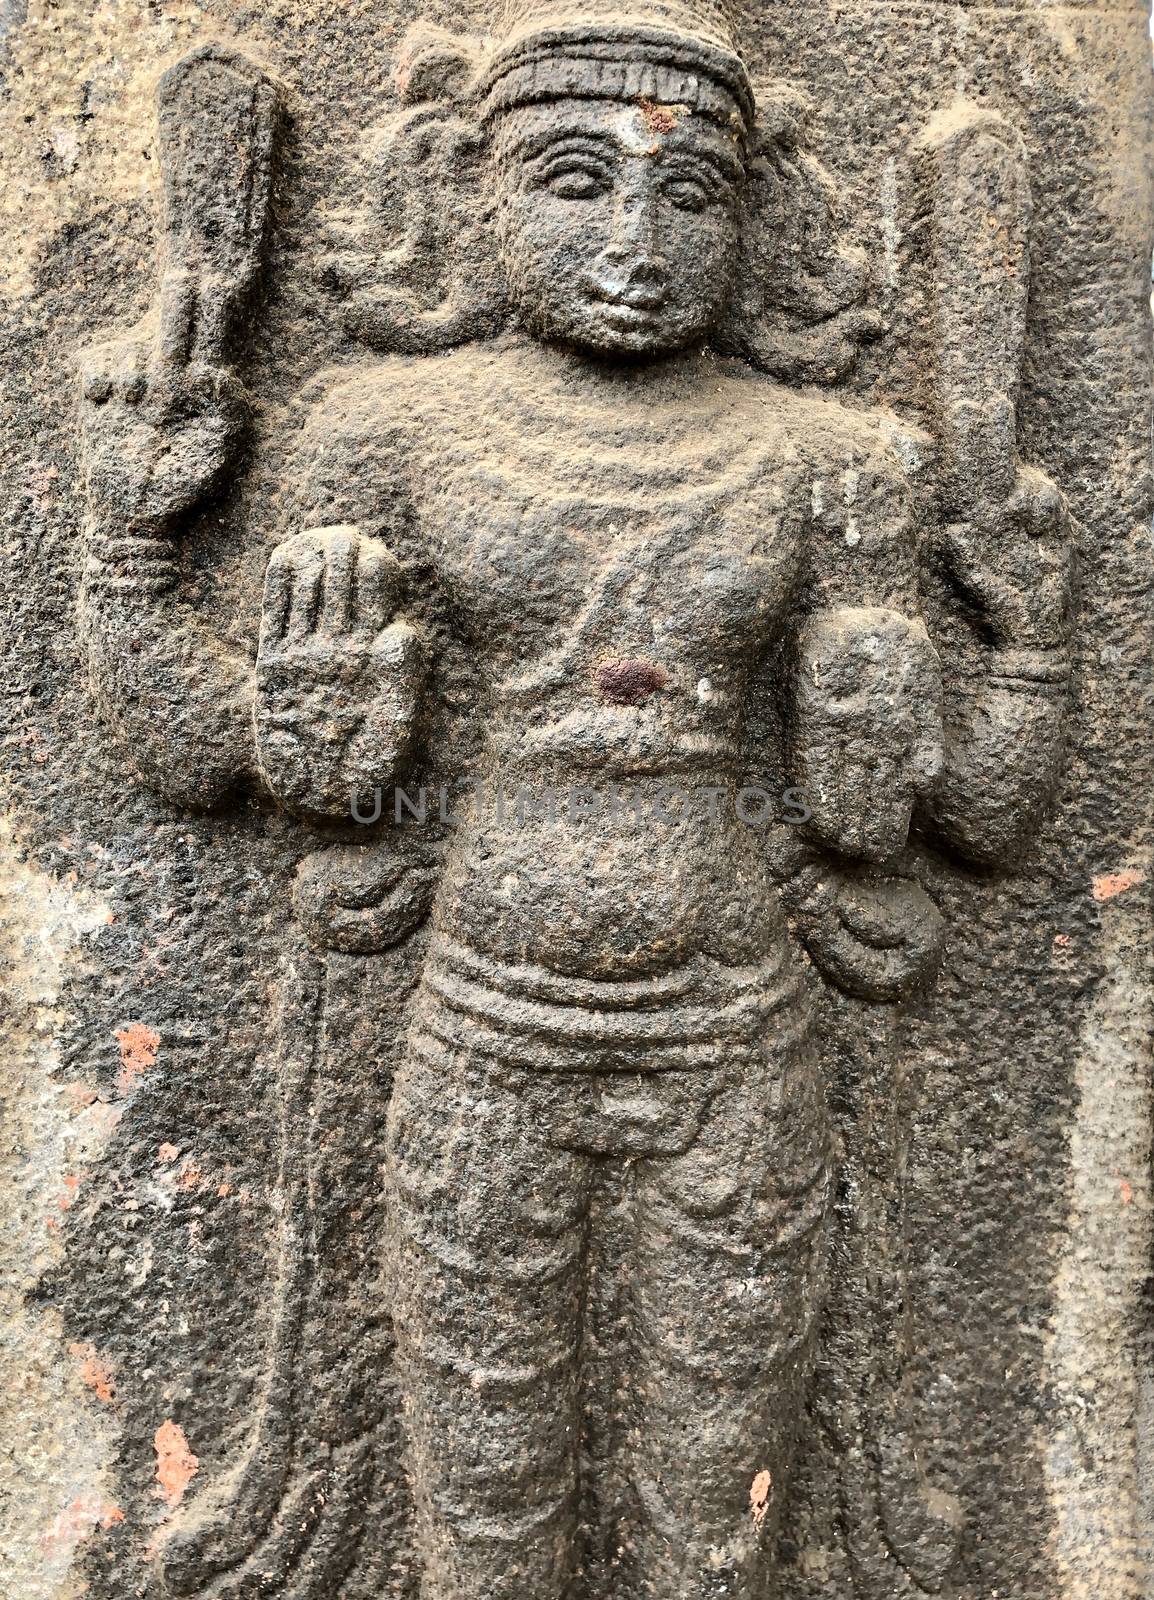 Bas relief sculpture of Hindu God carved in the stone walls at Shiva temple in Tamil nadu by prabhakaran851